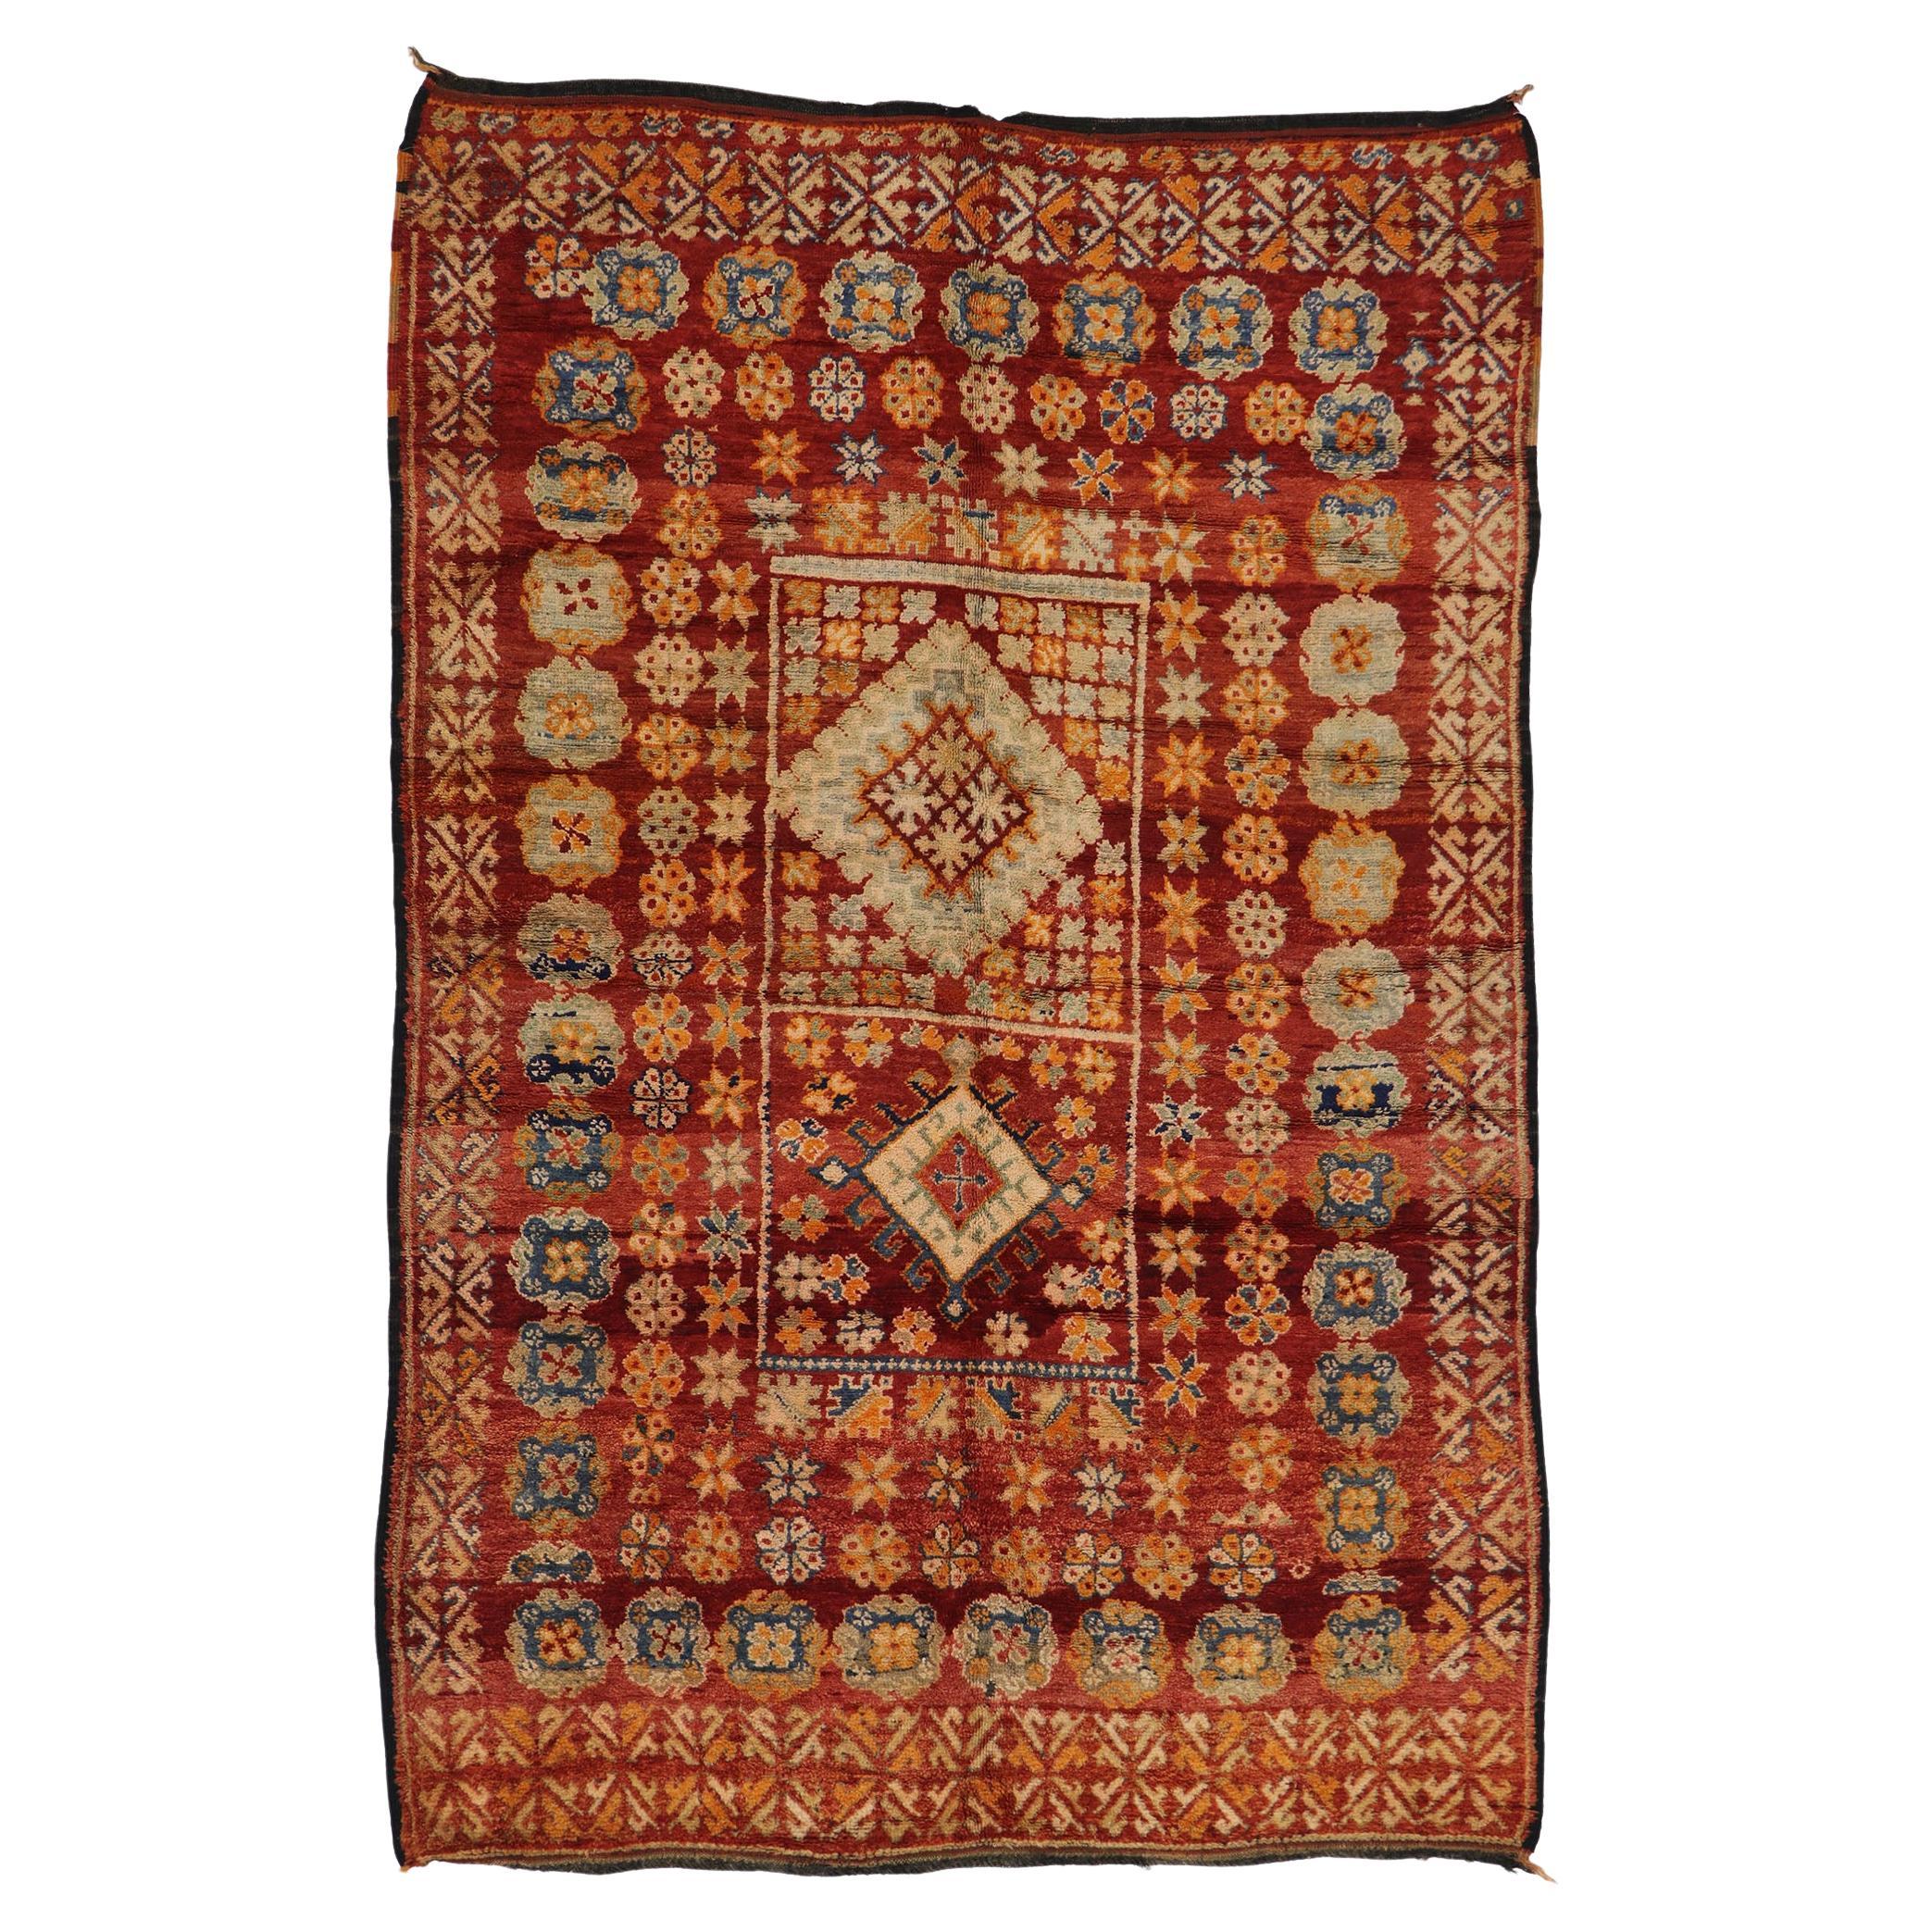 Vintage Moroccan Rug by Berber Tribes of Morocco